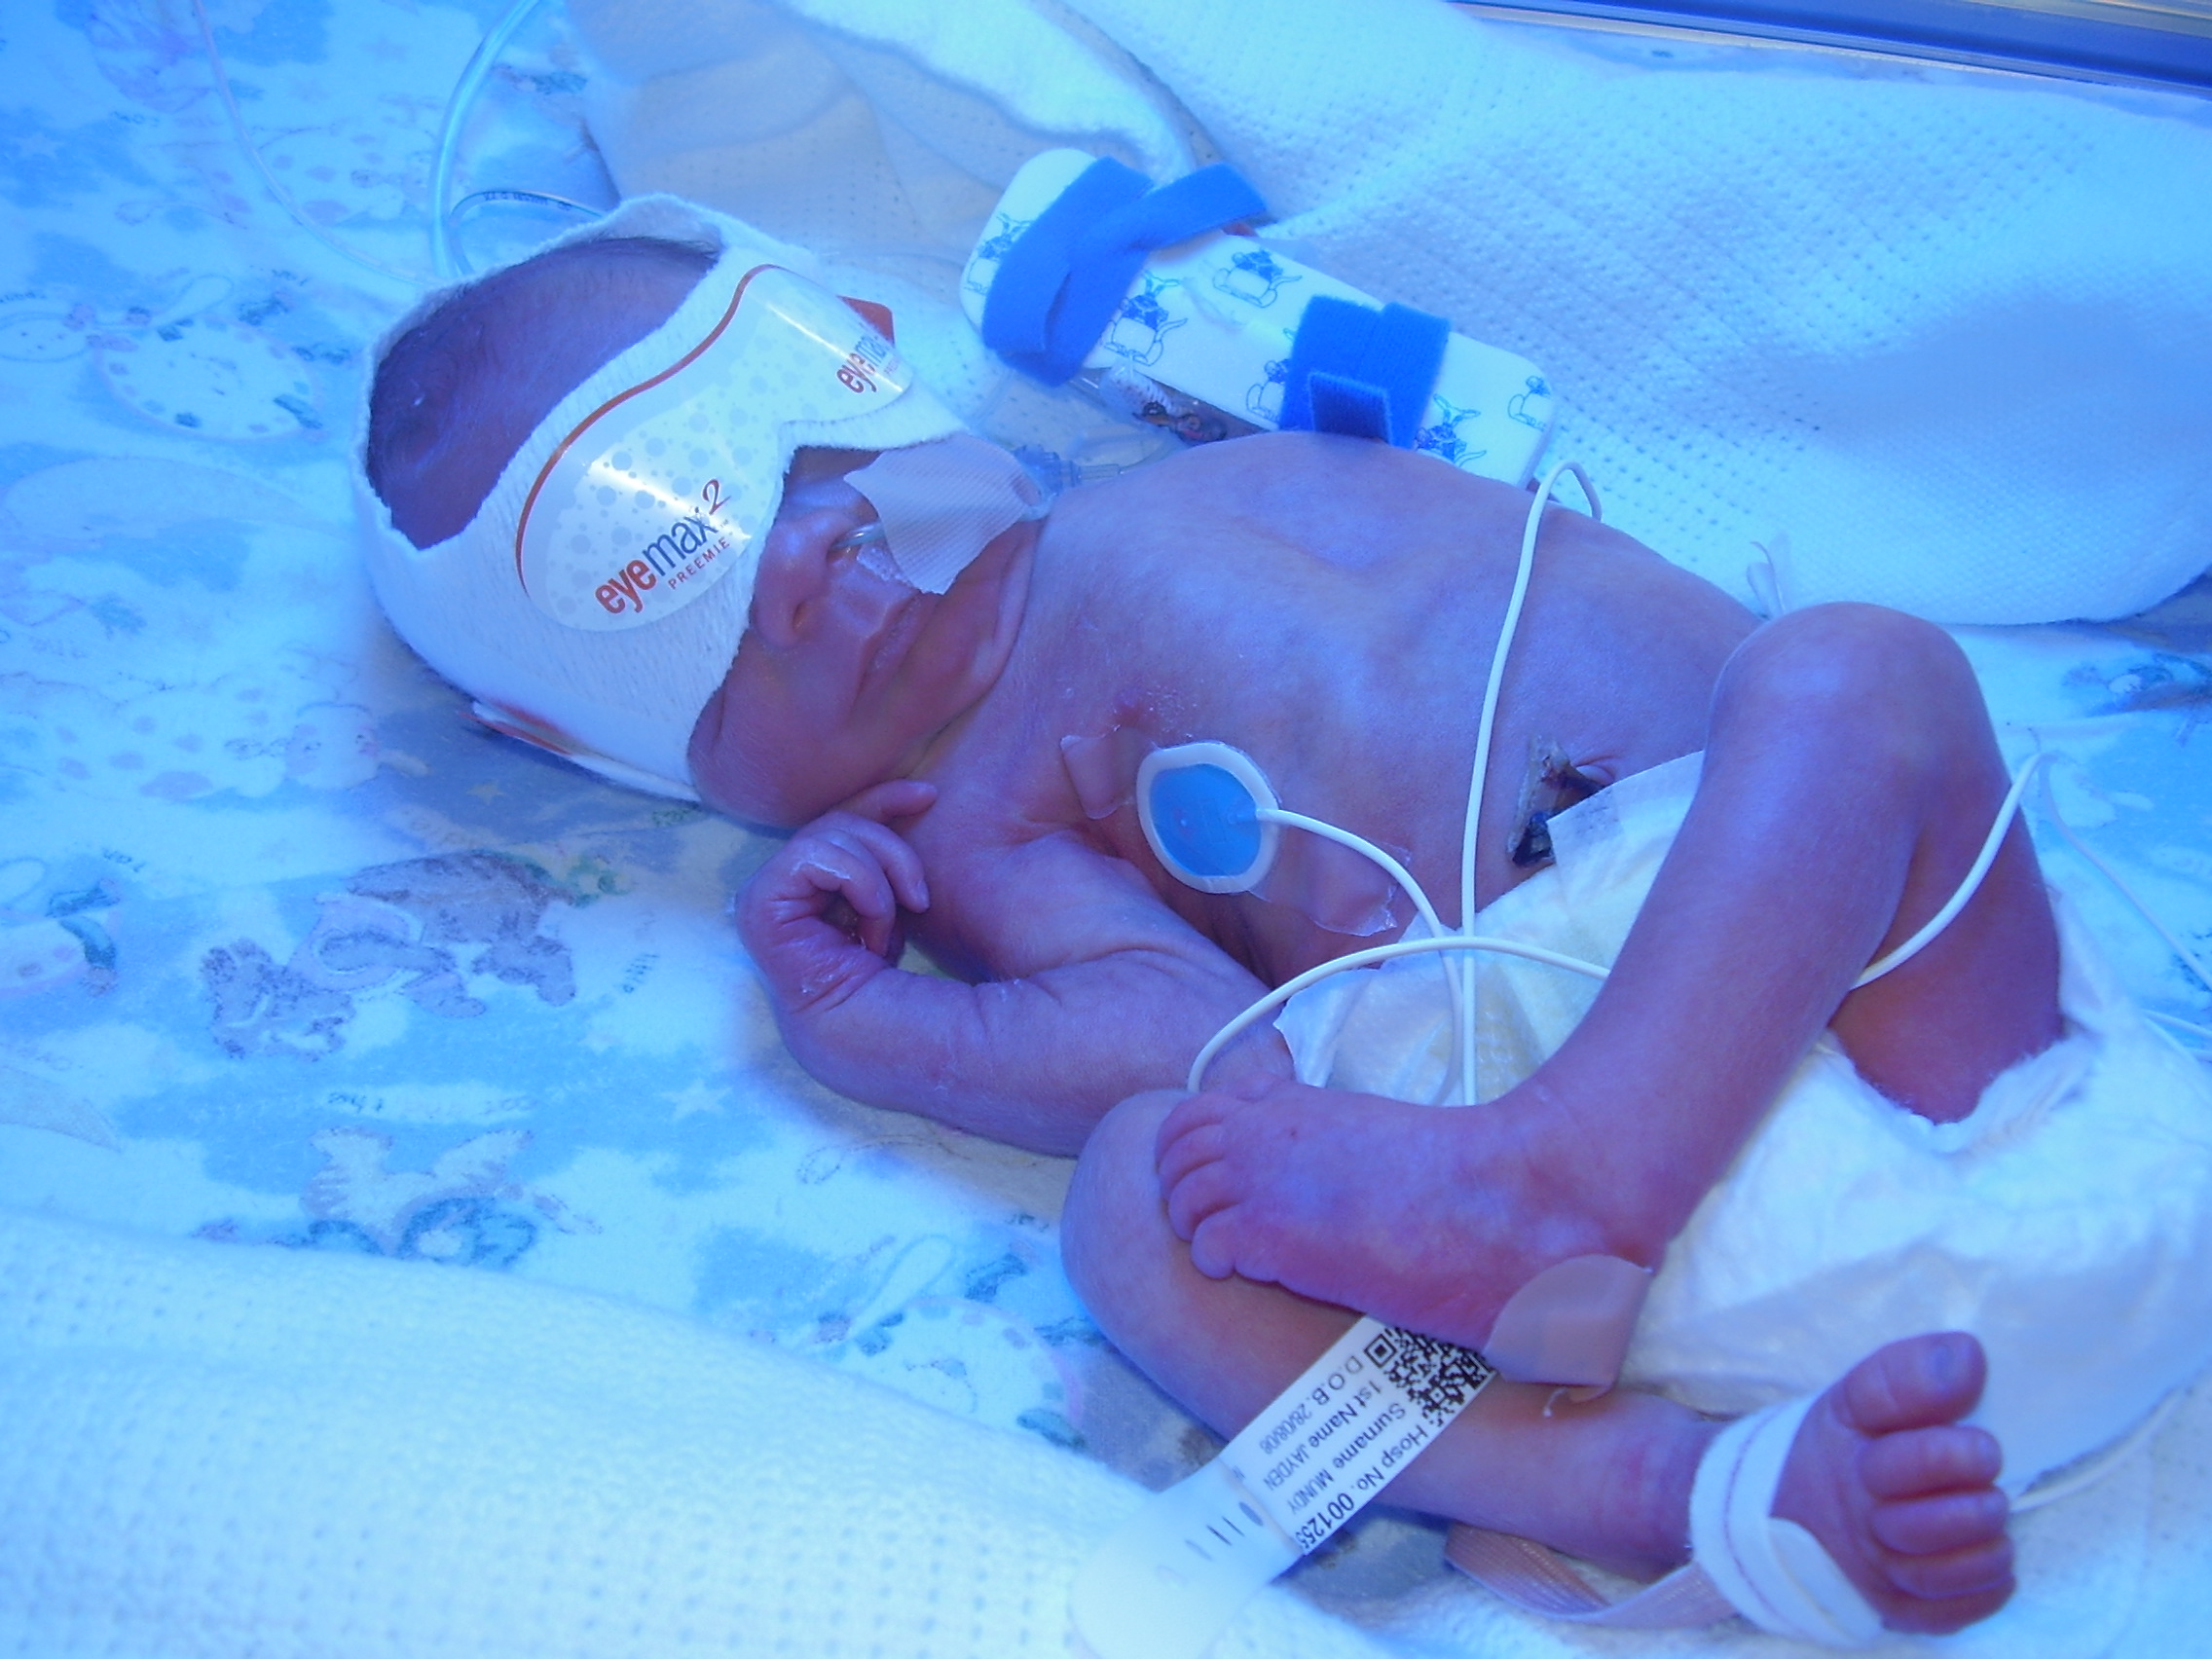 TERRIFIED OF HAVING ANOTHER PREMATURE BABY